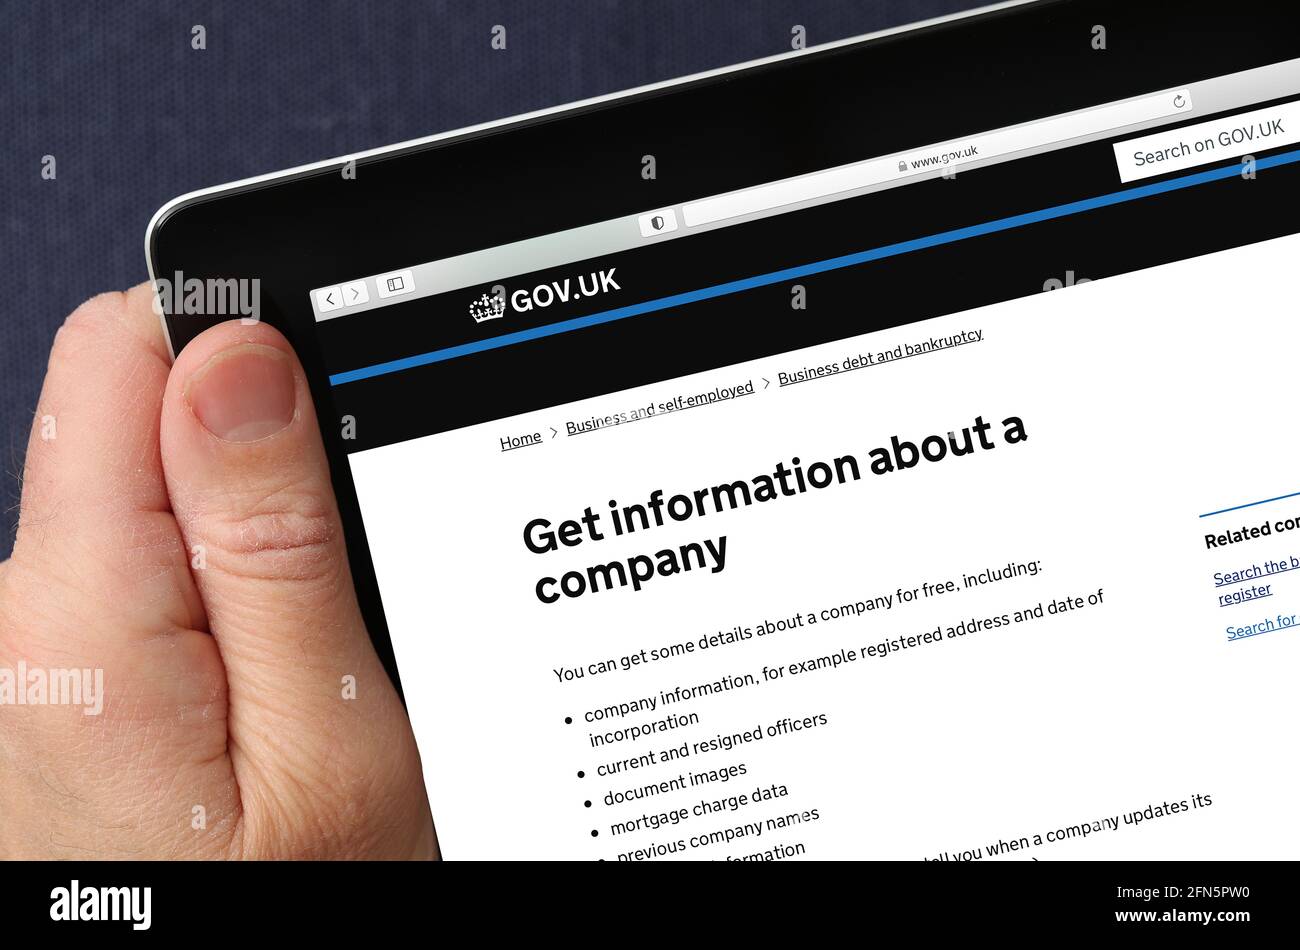 Companies House website viewed on an Ipad (editorial use only) Stock Photo